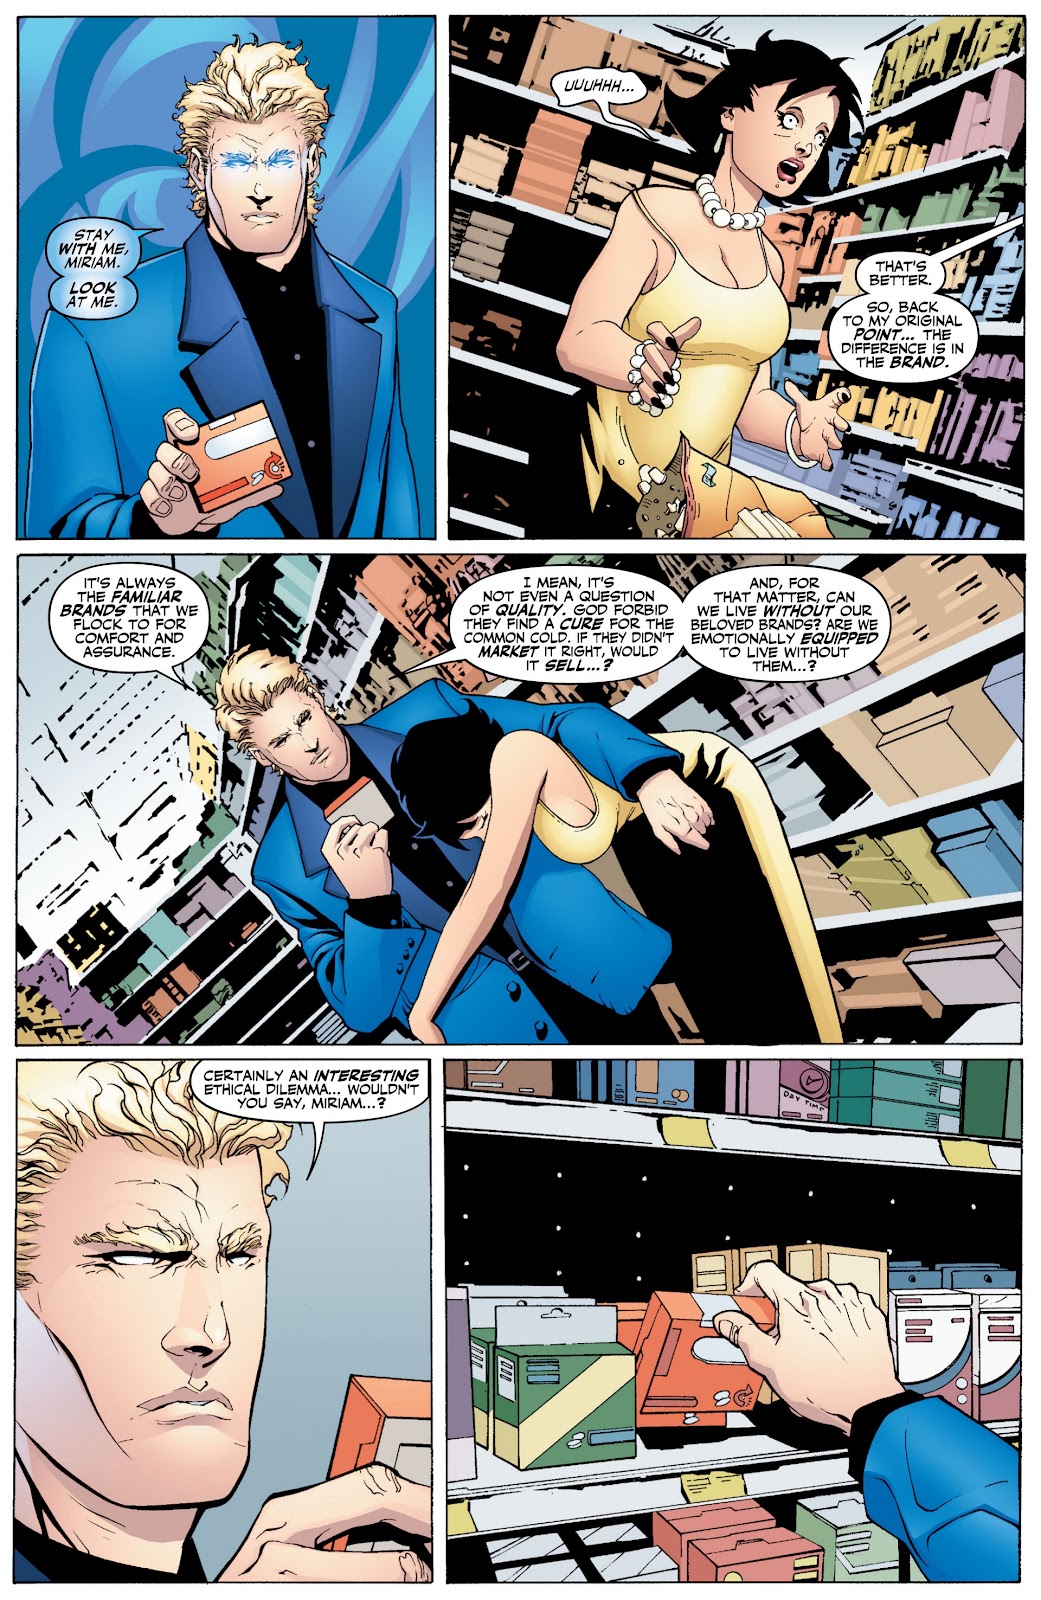 Wildcats Version 3.0 Issue #7 #7 - English 21